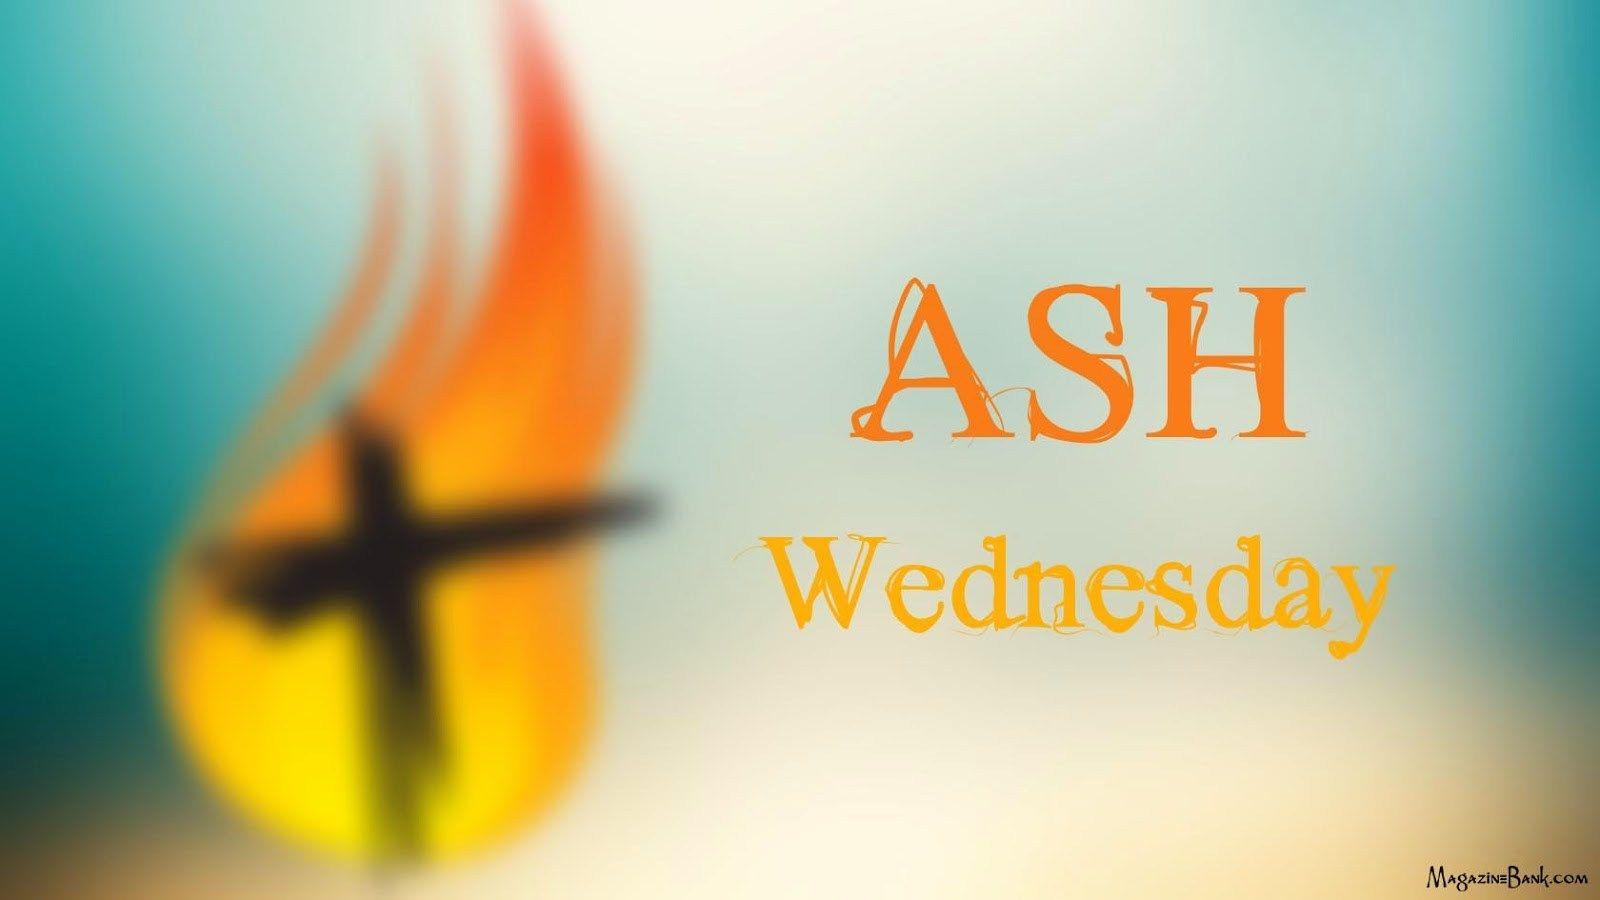 Awesome Ash Wednesday Image, Wishes & Greetings